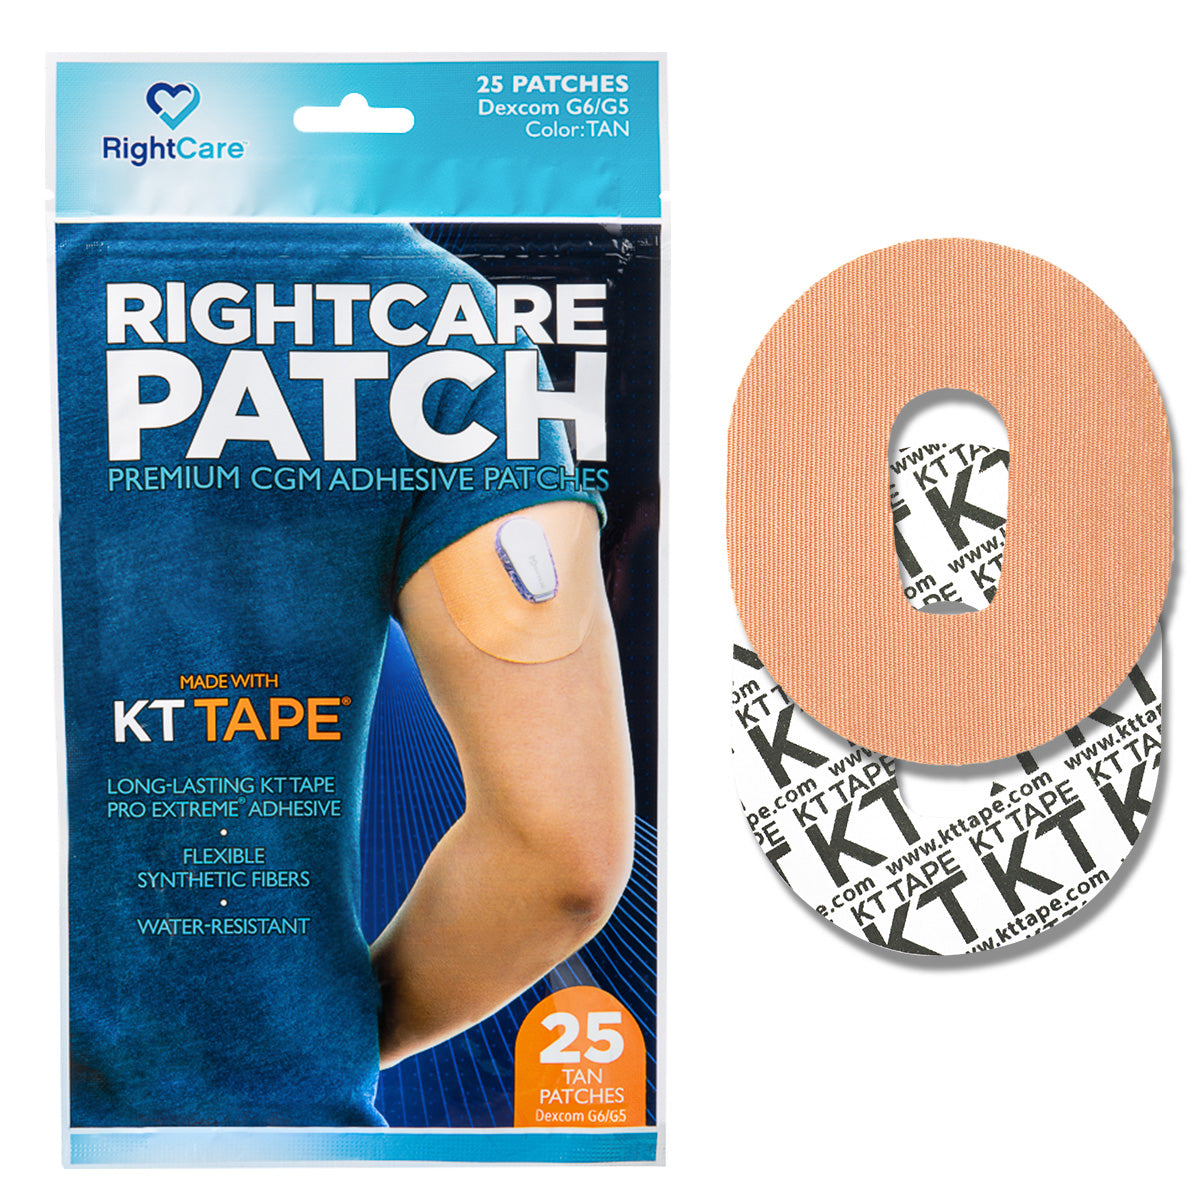 RightCare CGM Adhesive Patch made with KT Tape, Dexcom G6, Bag of 25 97189312